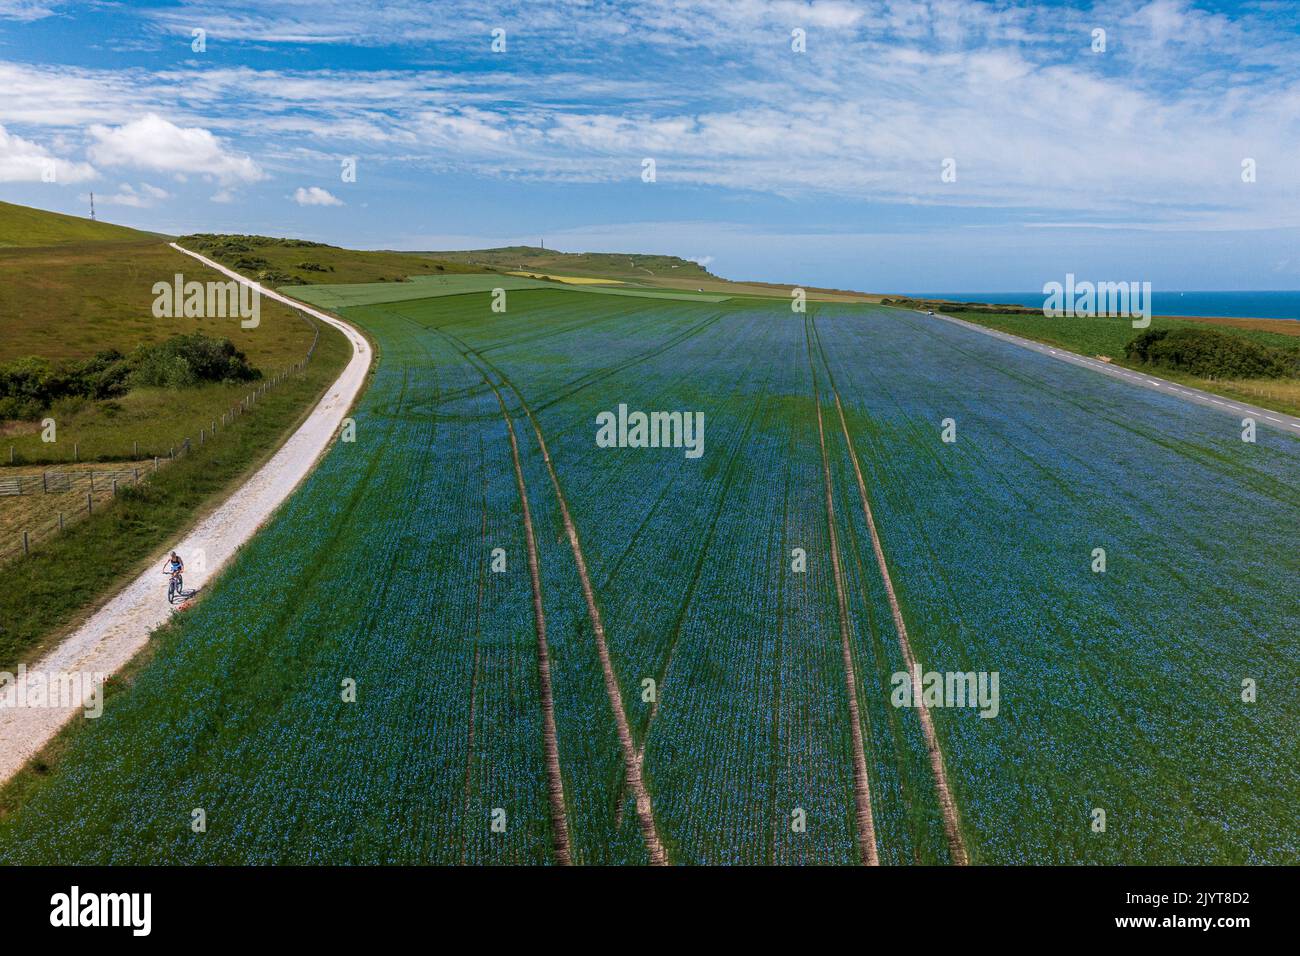 Flax field in bloom in spring, Pas de Calais, France Stock Photo